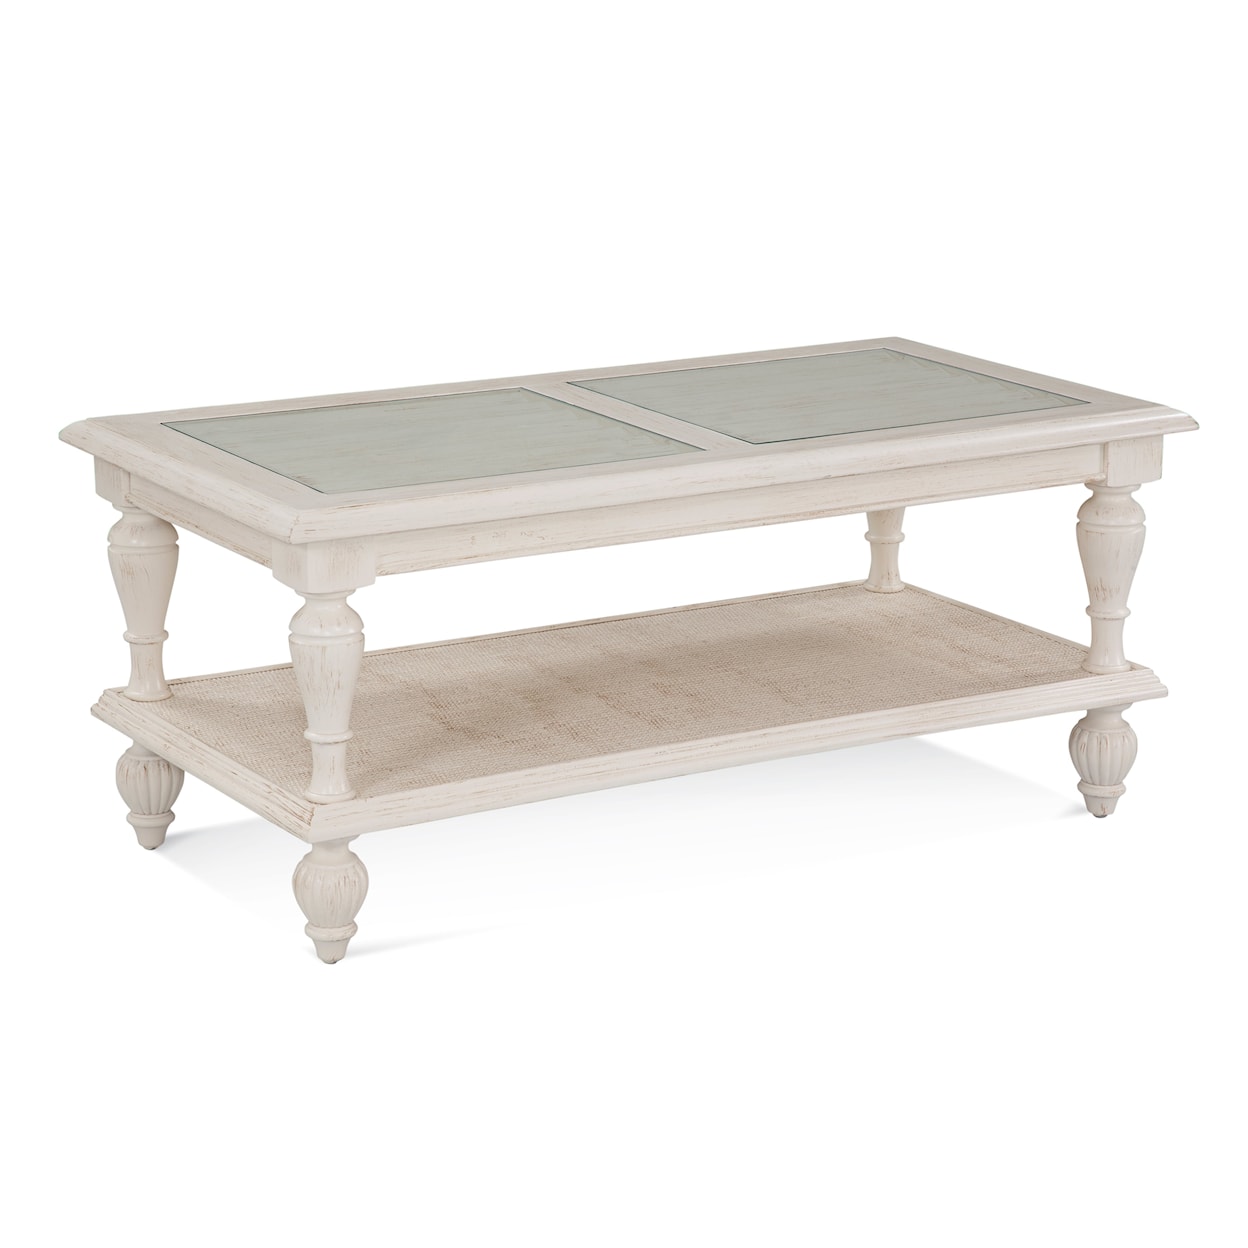 Braxton Culler Grand View Cocktail Table